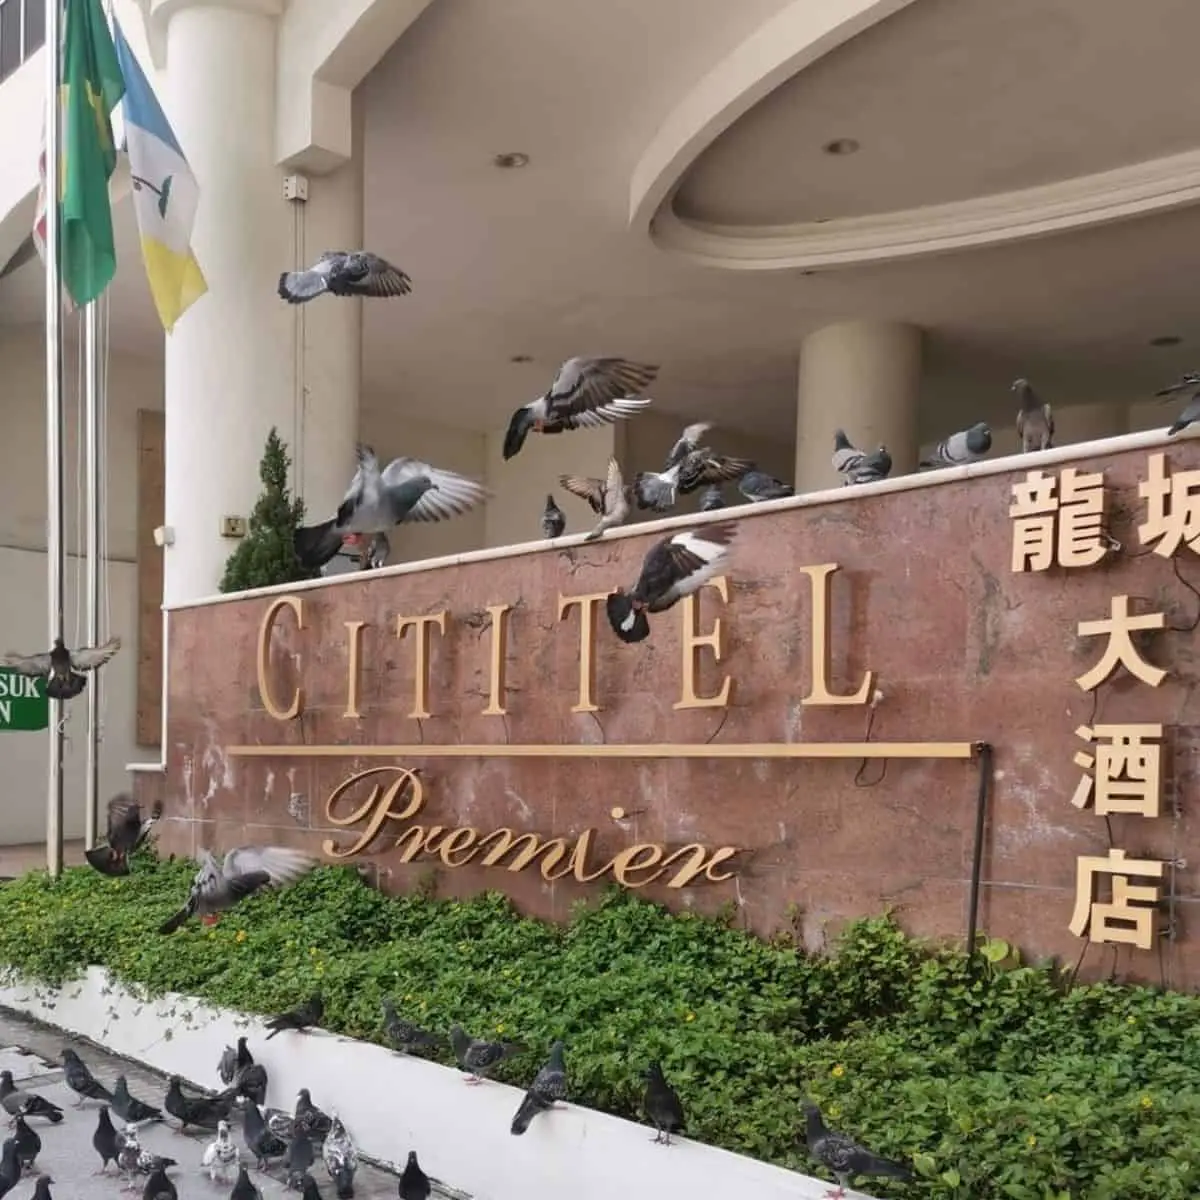 A modern and aesthetic look of Cititel entrance